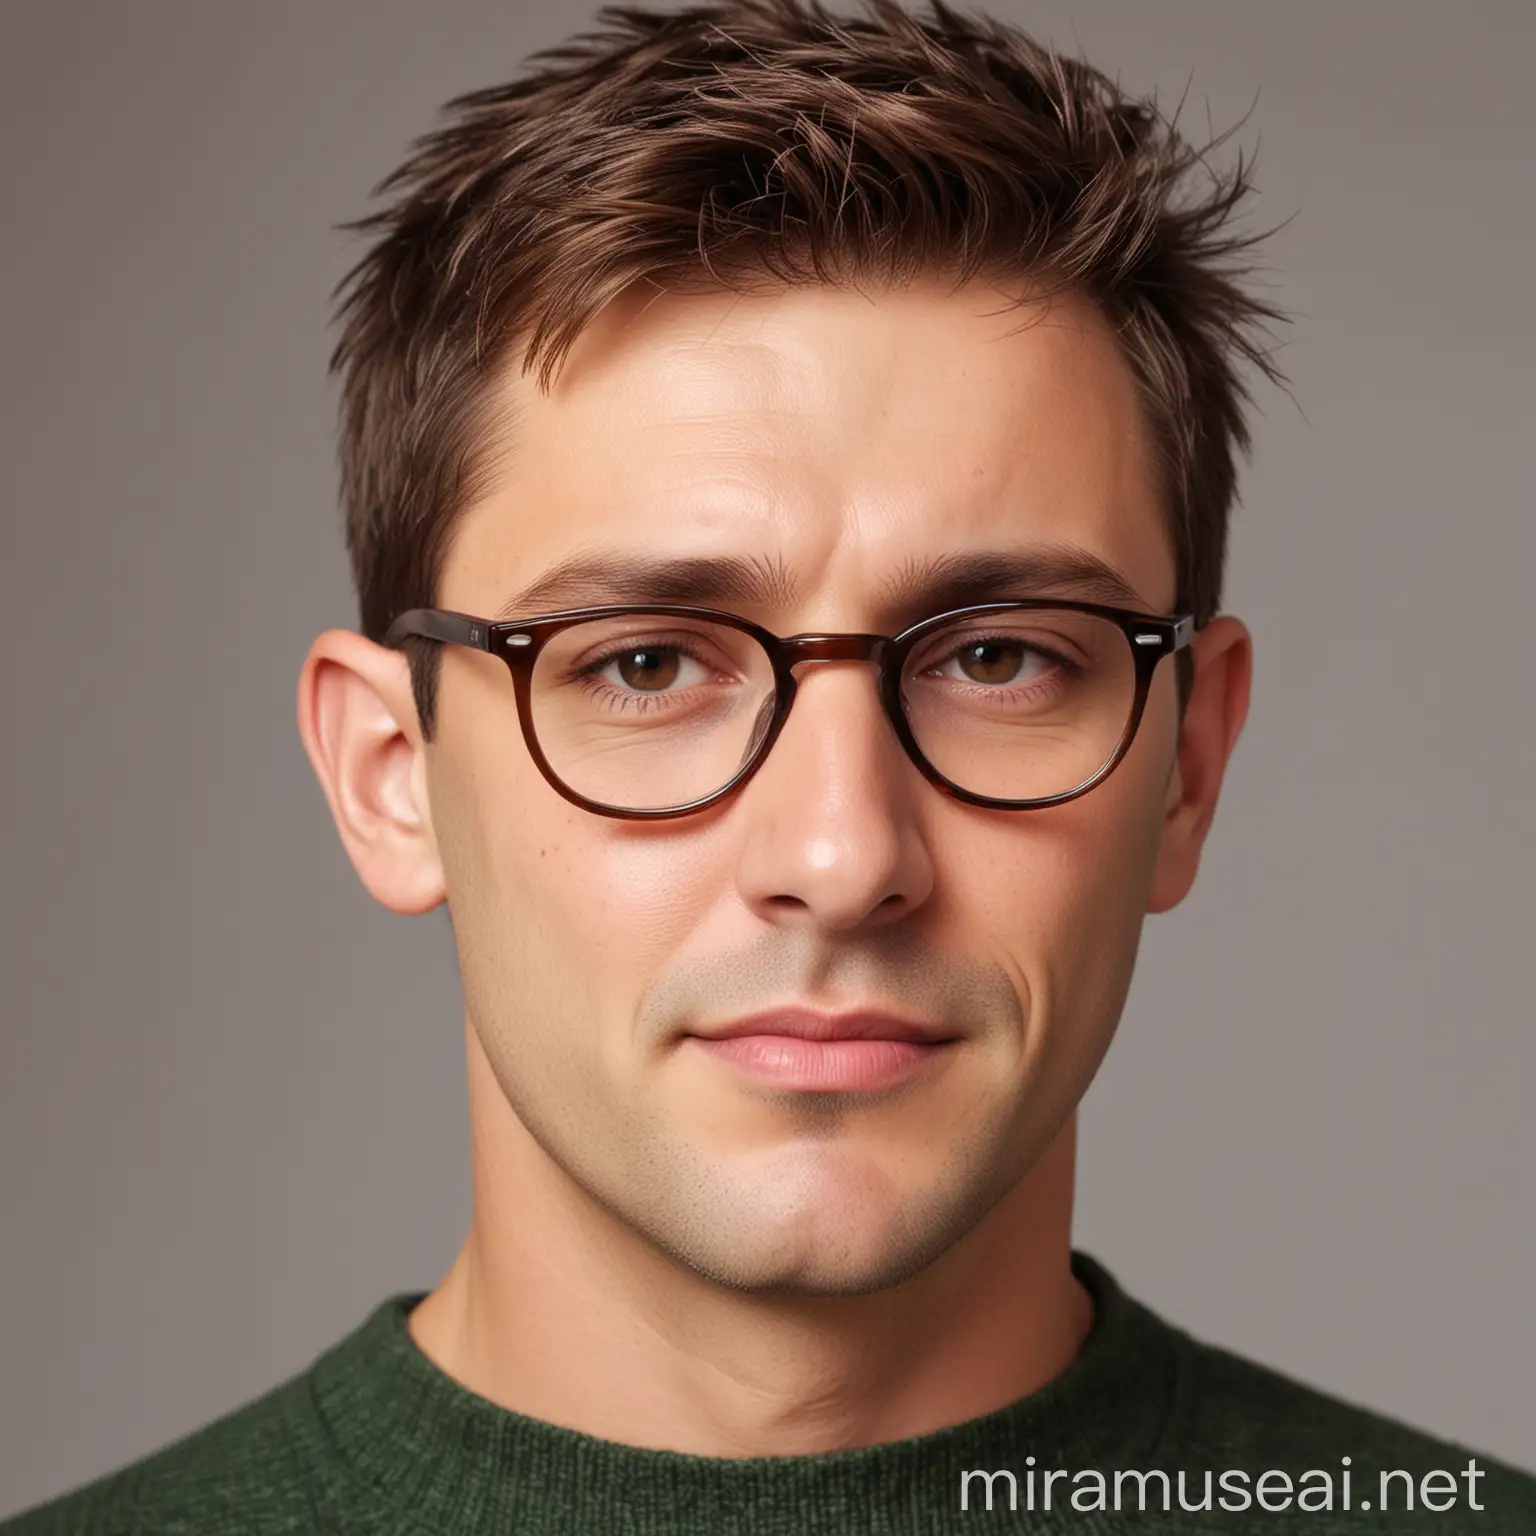 caucasian, short, brown hair, clean shaven, round glasses, normal weight, short hair, middle aged, male